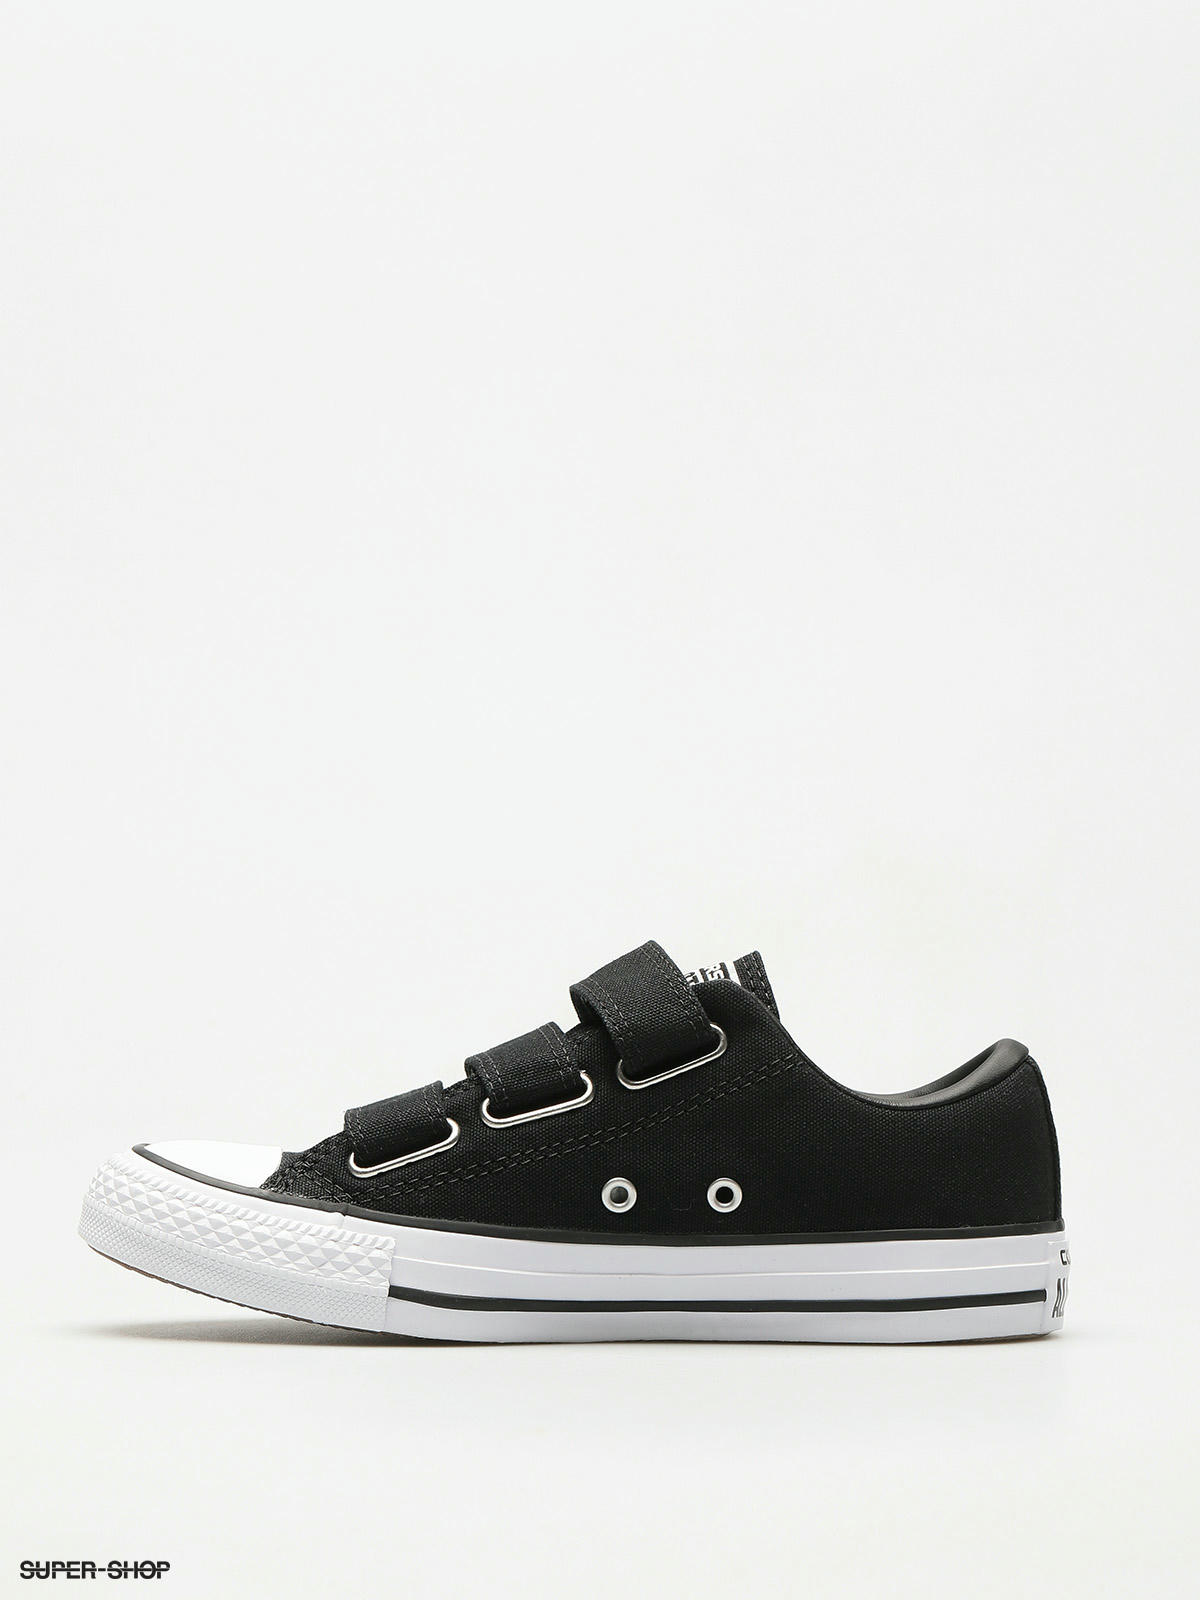 converse chuck taylor all star 3v low top